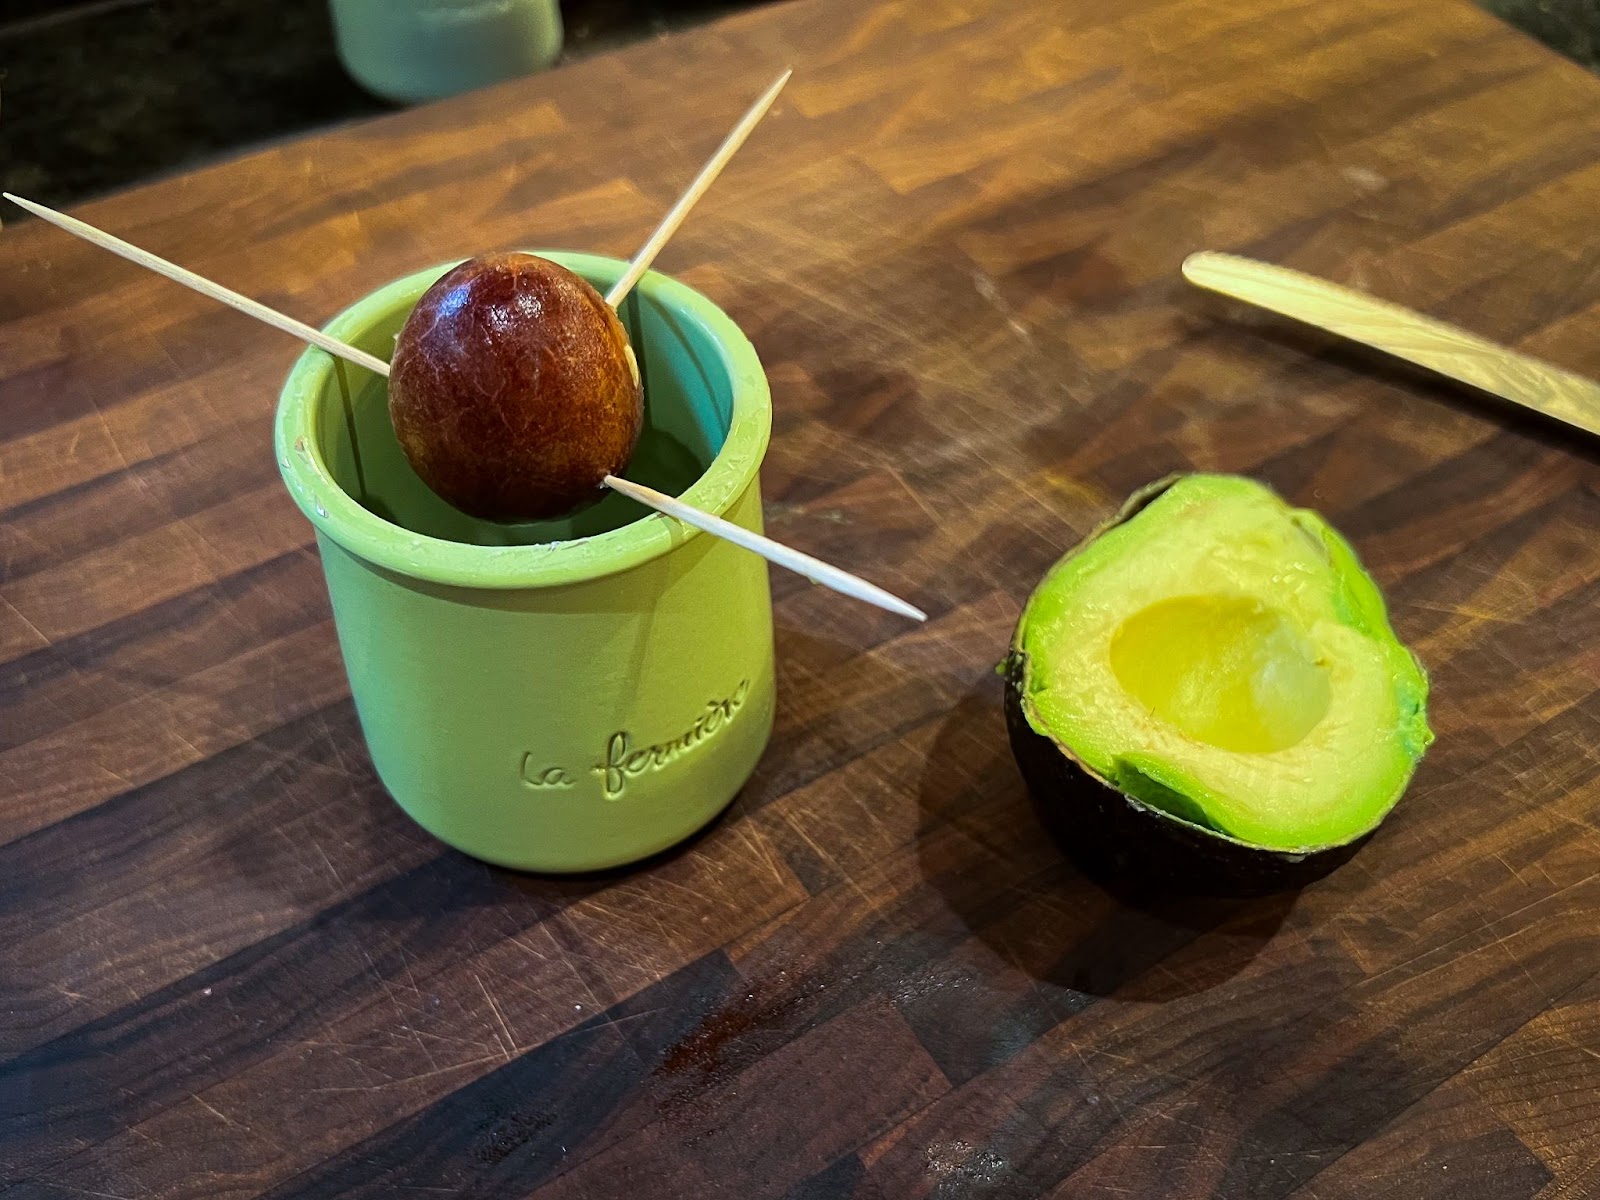 Sliced Avocado and Avocado pit with toothpicks sticking in side suspended over jar of water